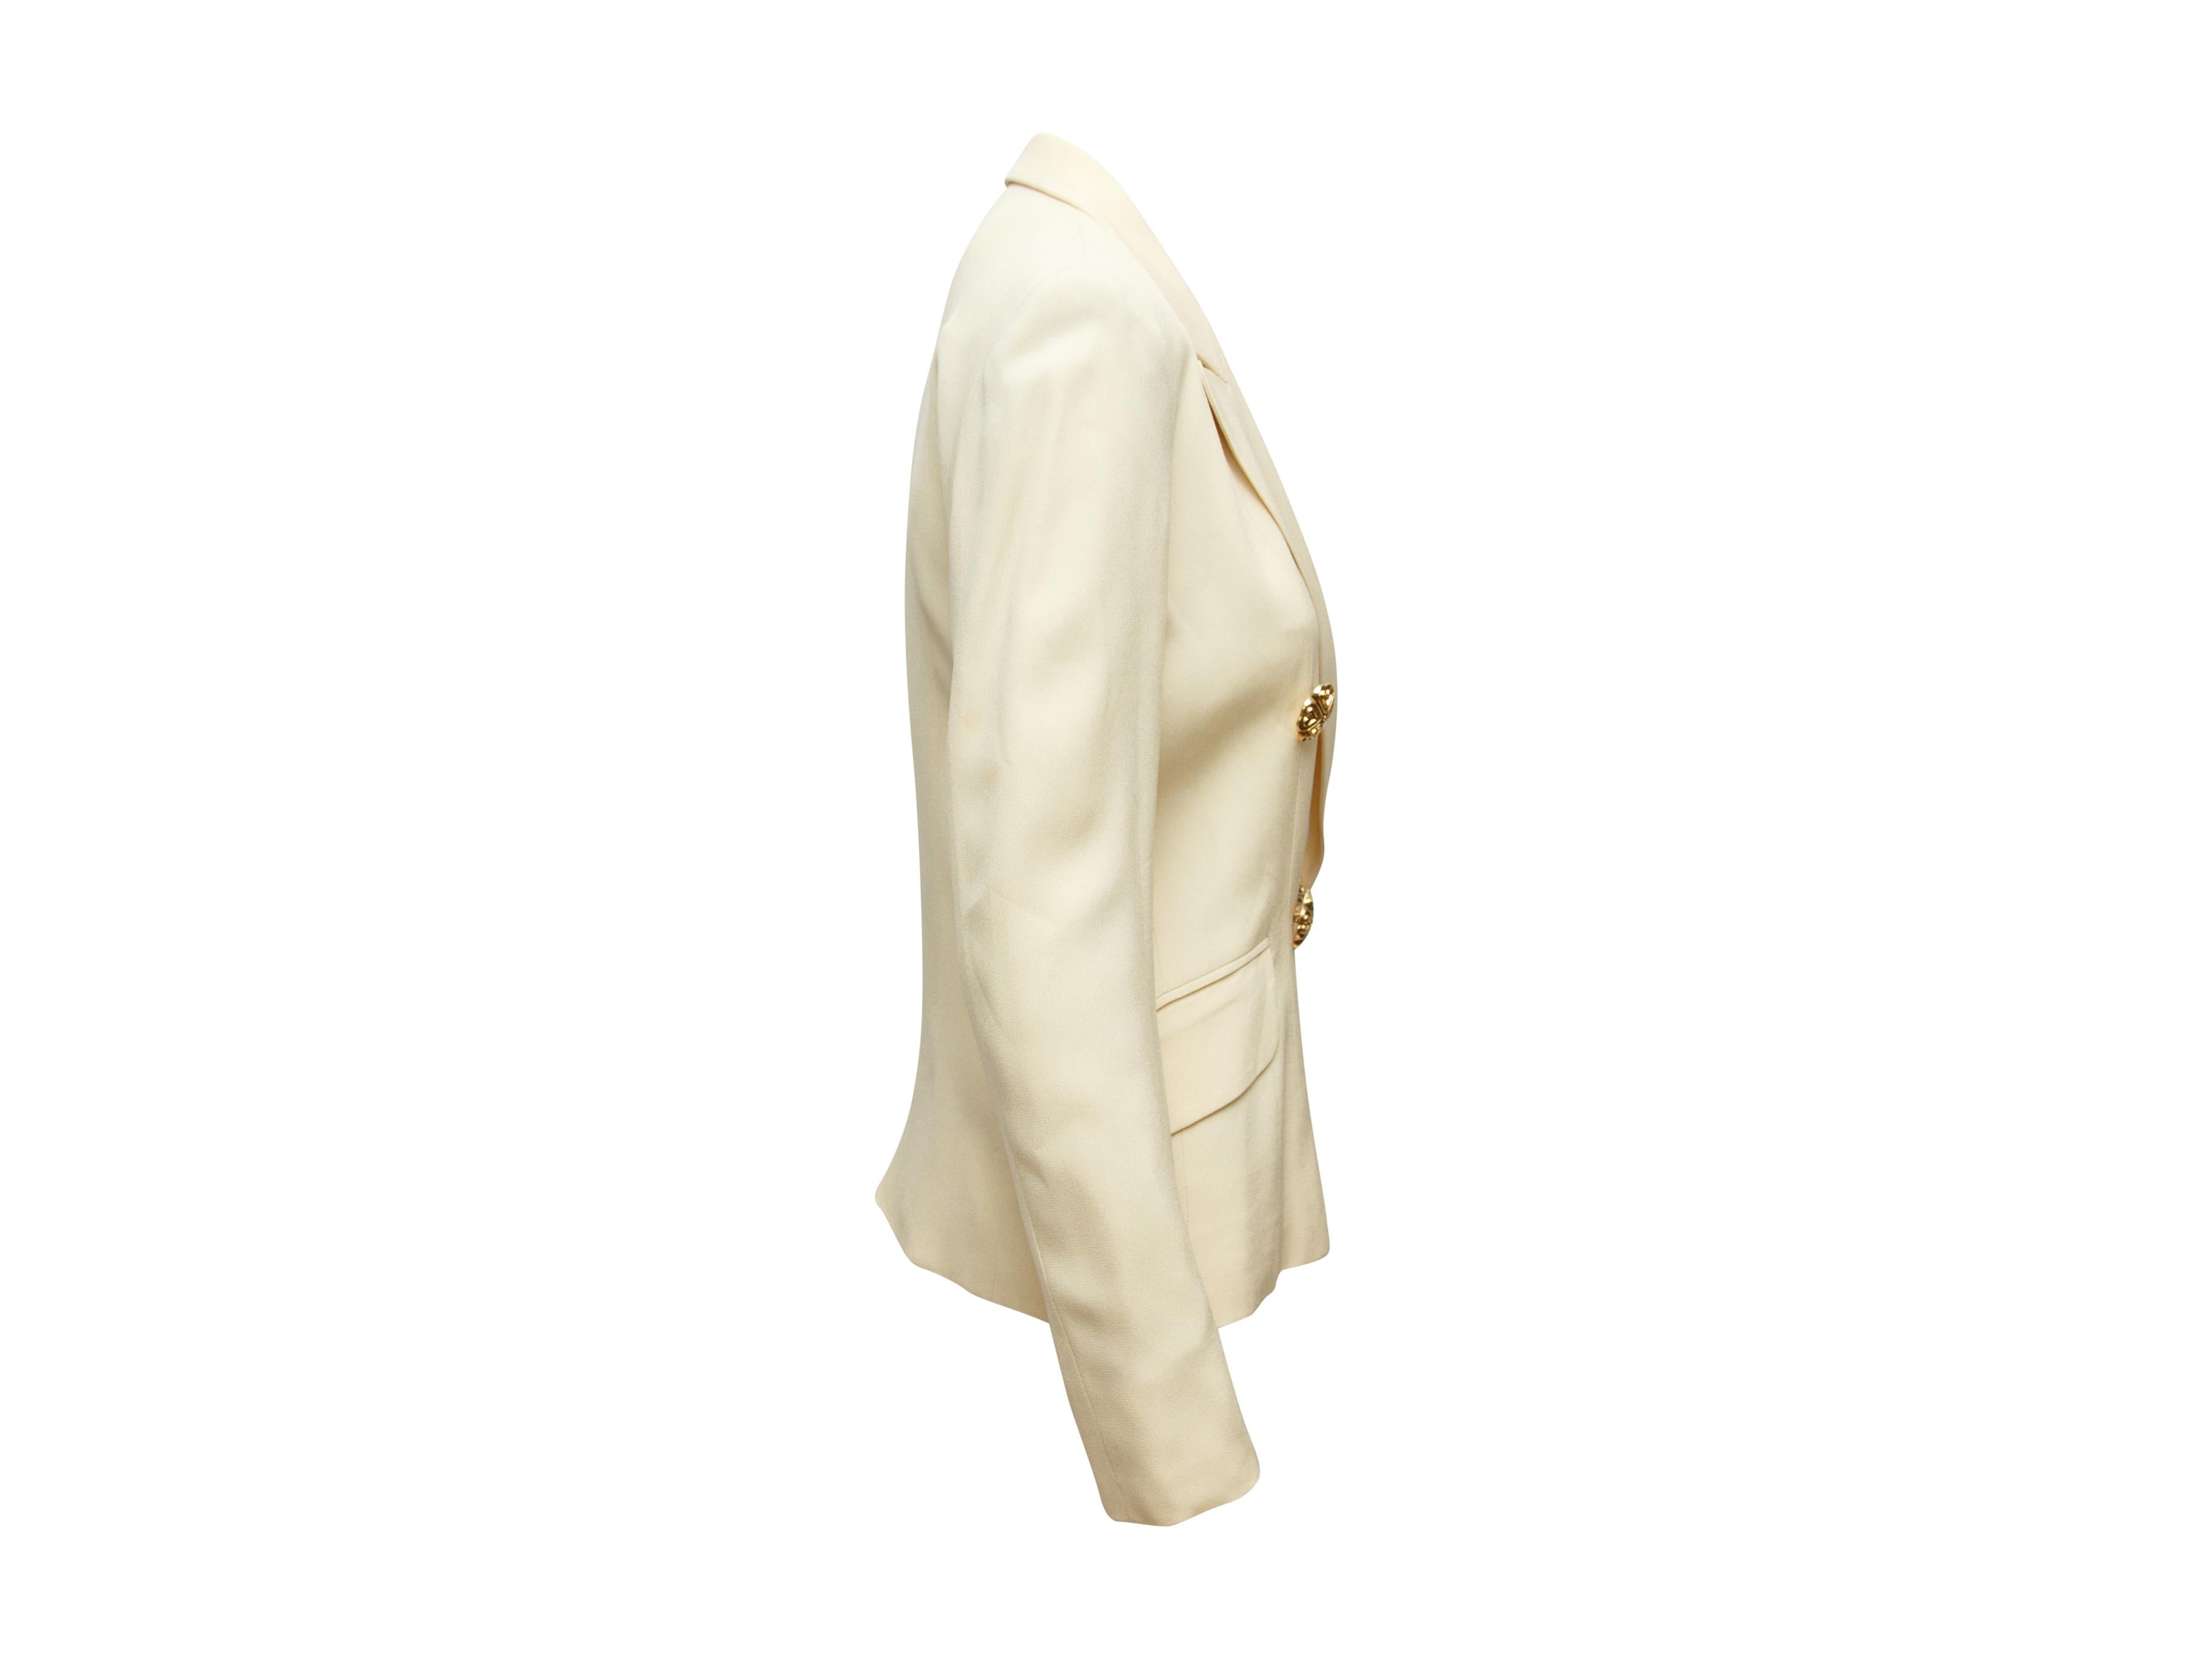 Product details:  Vintage cream double-breasted blazer by Cheap and Chic by Moschino.  Peak lapel.  Long sleeves.  Double-breasted button-front closure.  Waist flap pockets.  Goldtone hardware.  Label size IT 42.  28